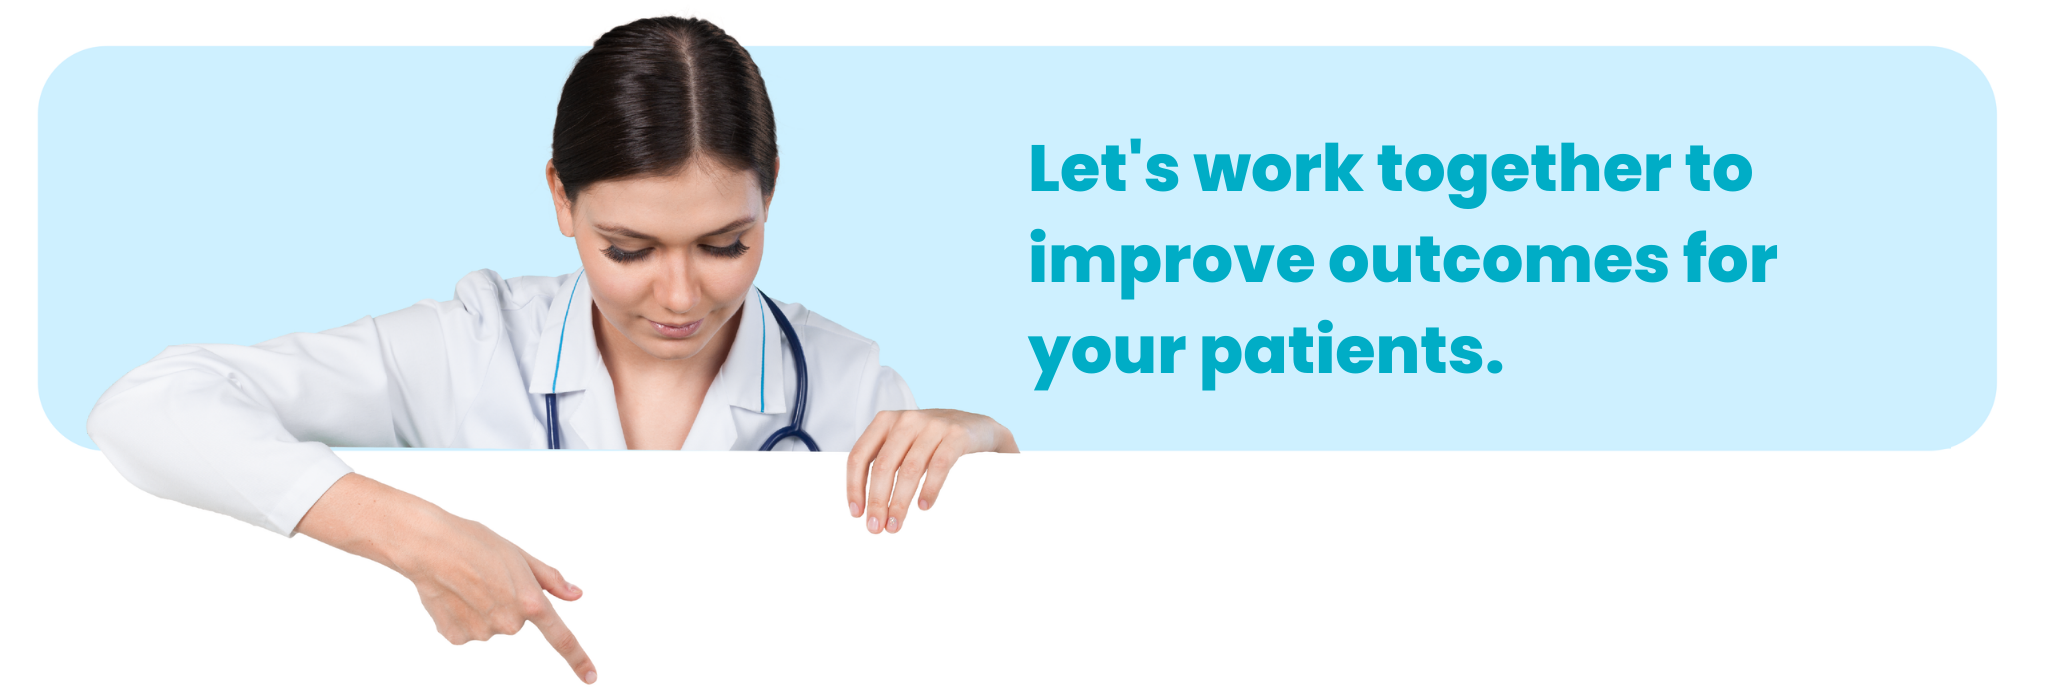 Let's work together to improve outcomes for your patients.